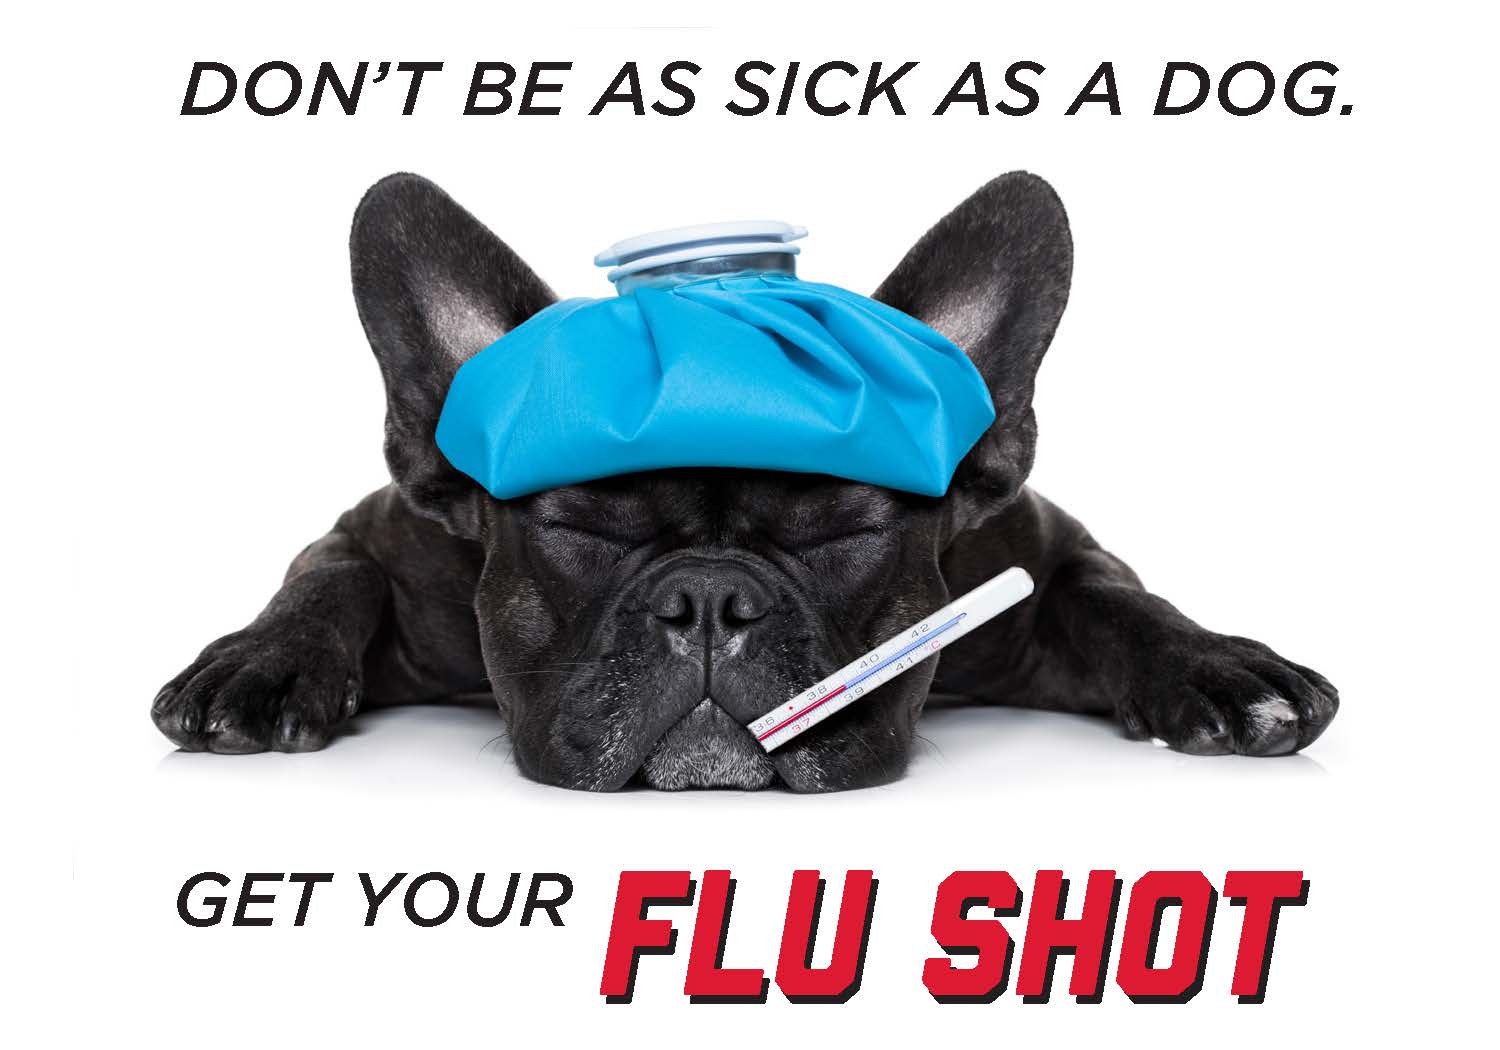 Free flu shots are now available at the Health Center Announce